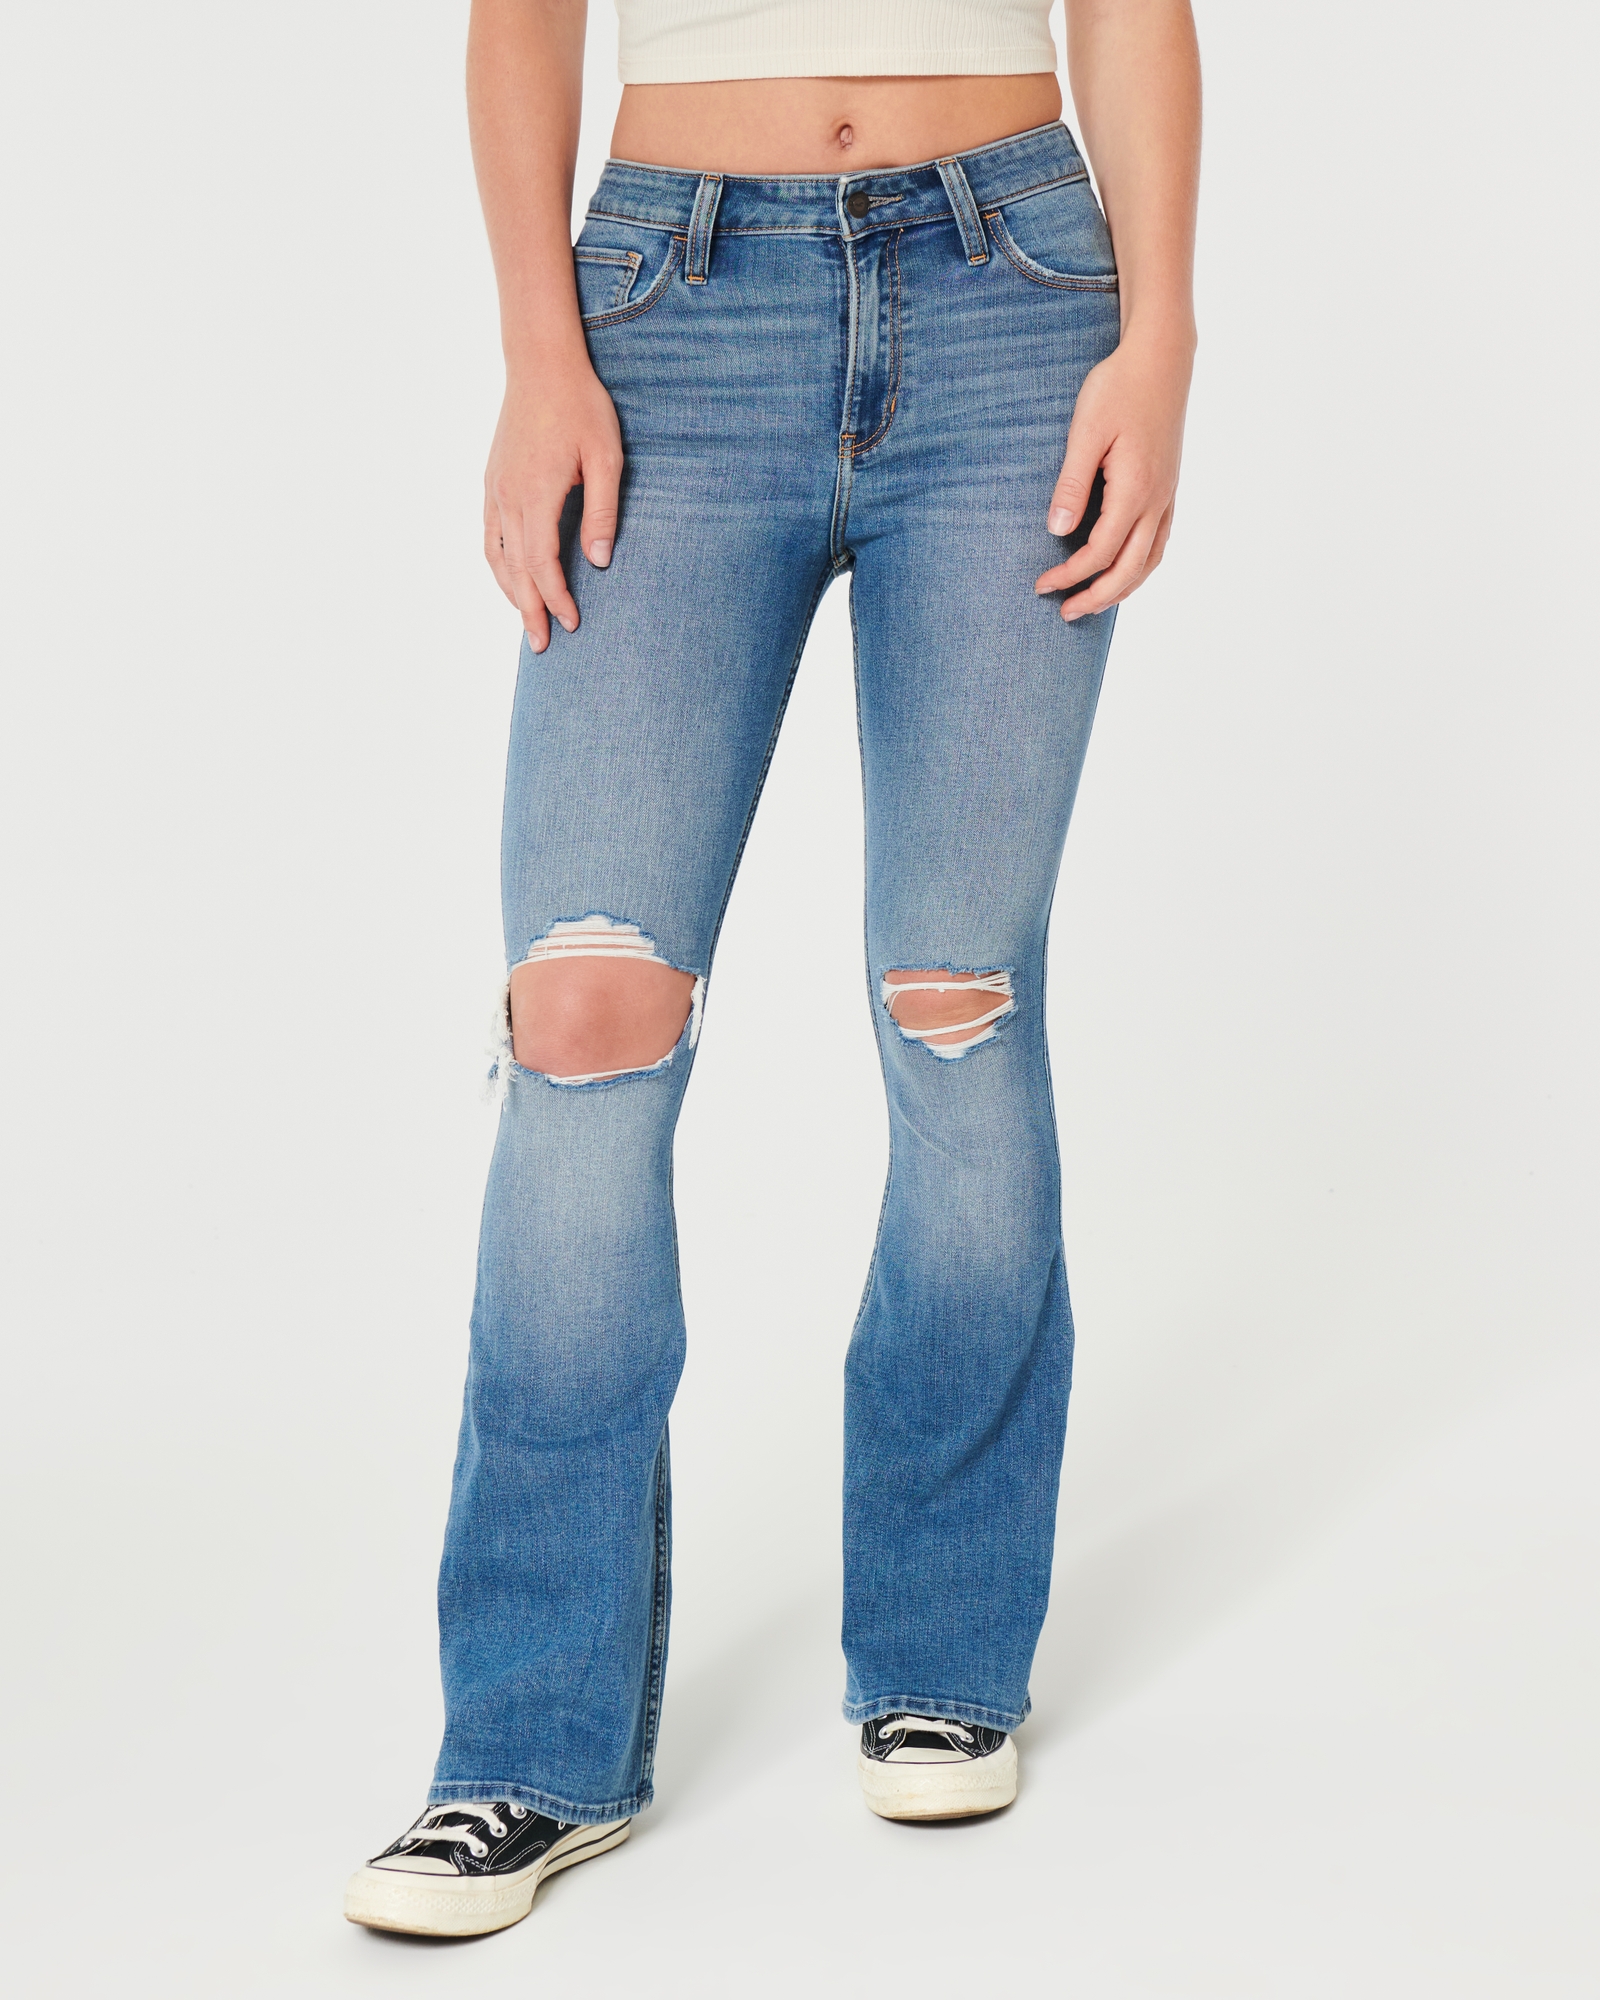 Women's Low-Rise Ripped Light Wash Flare Jeans